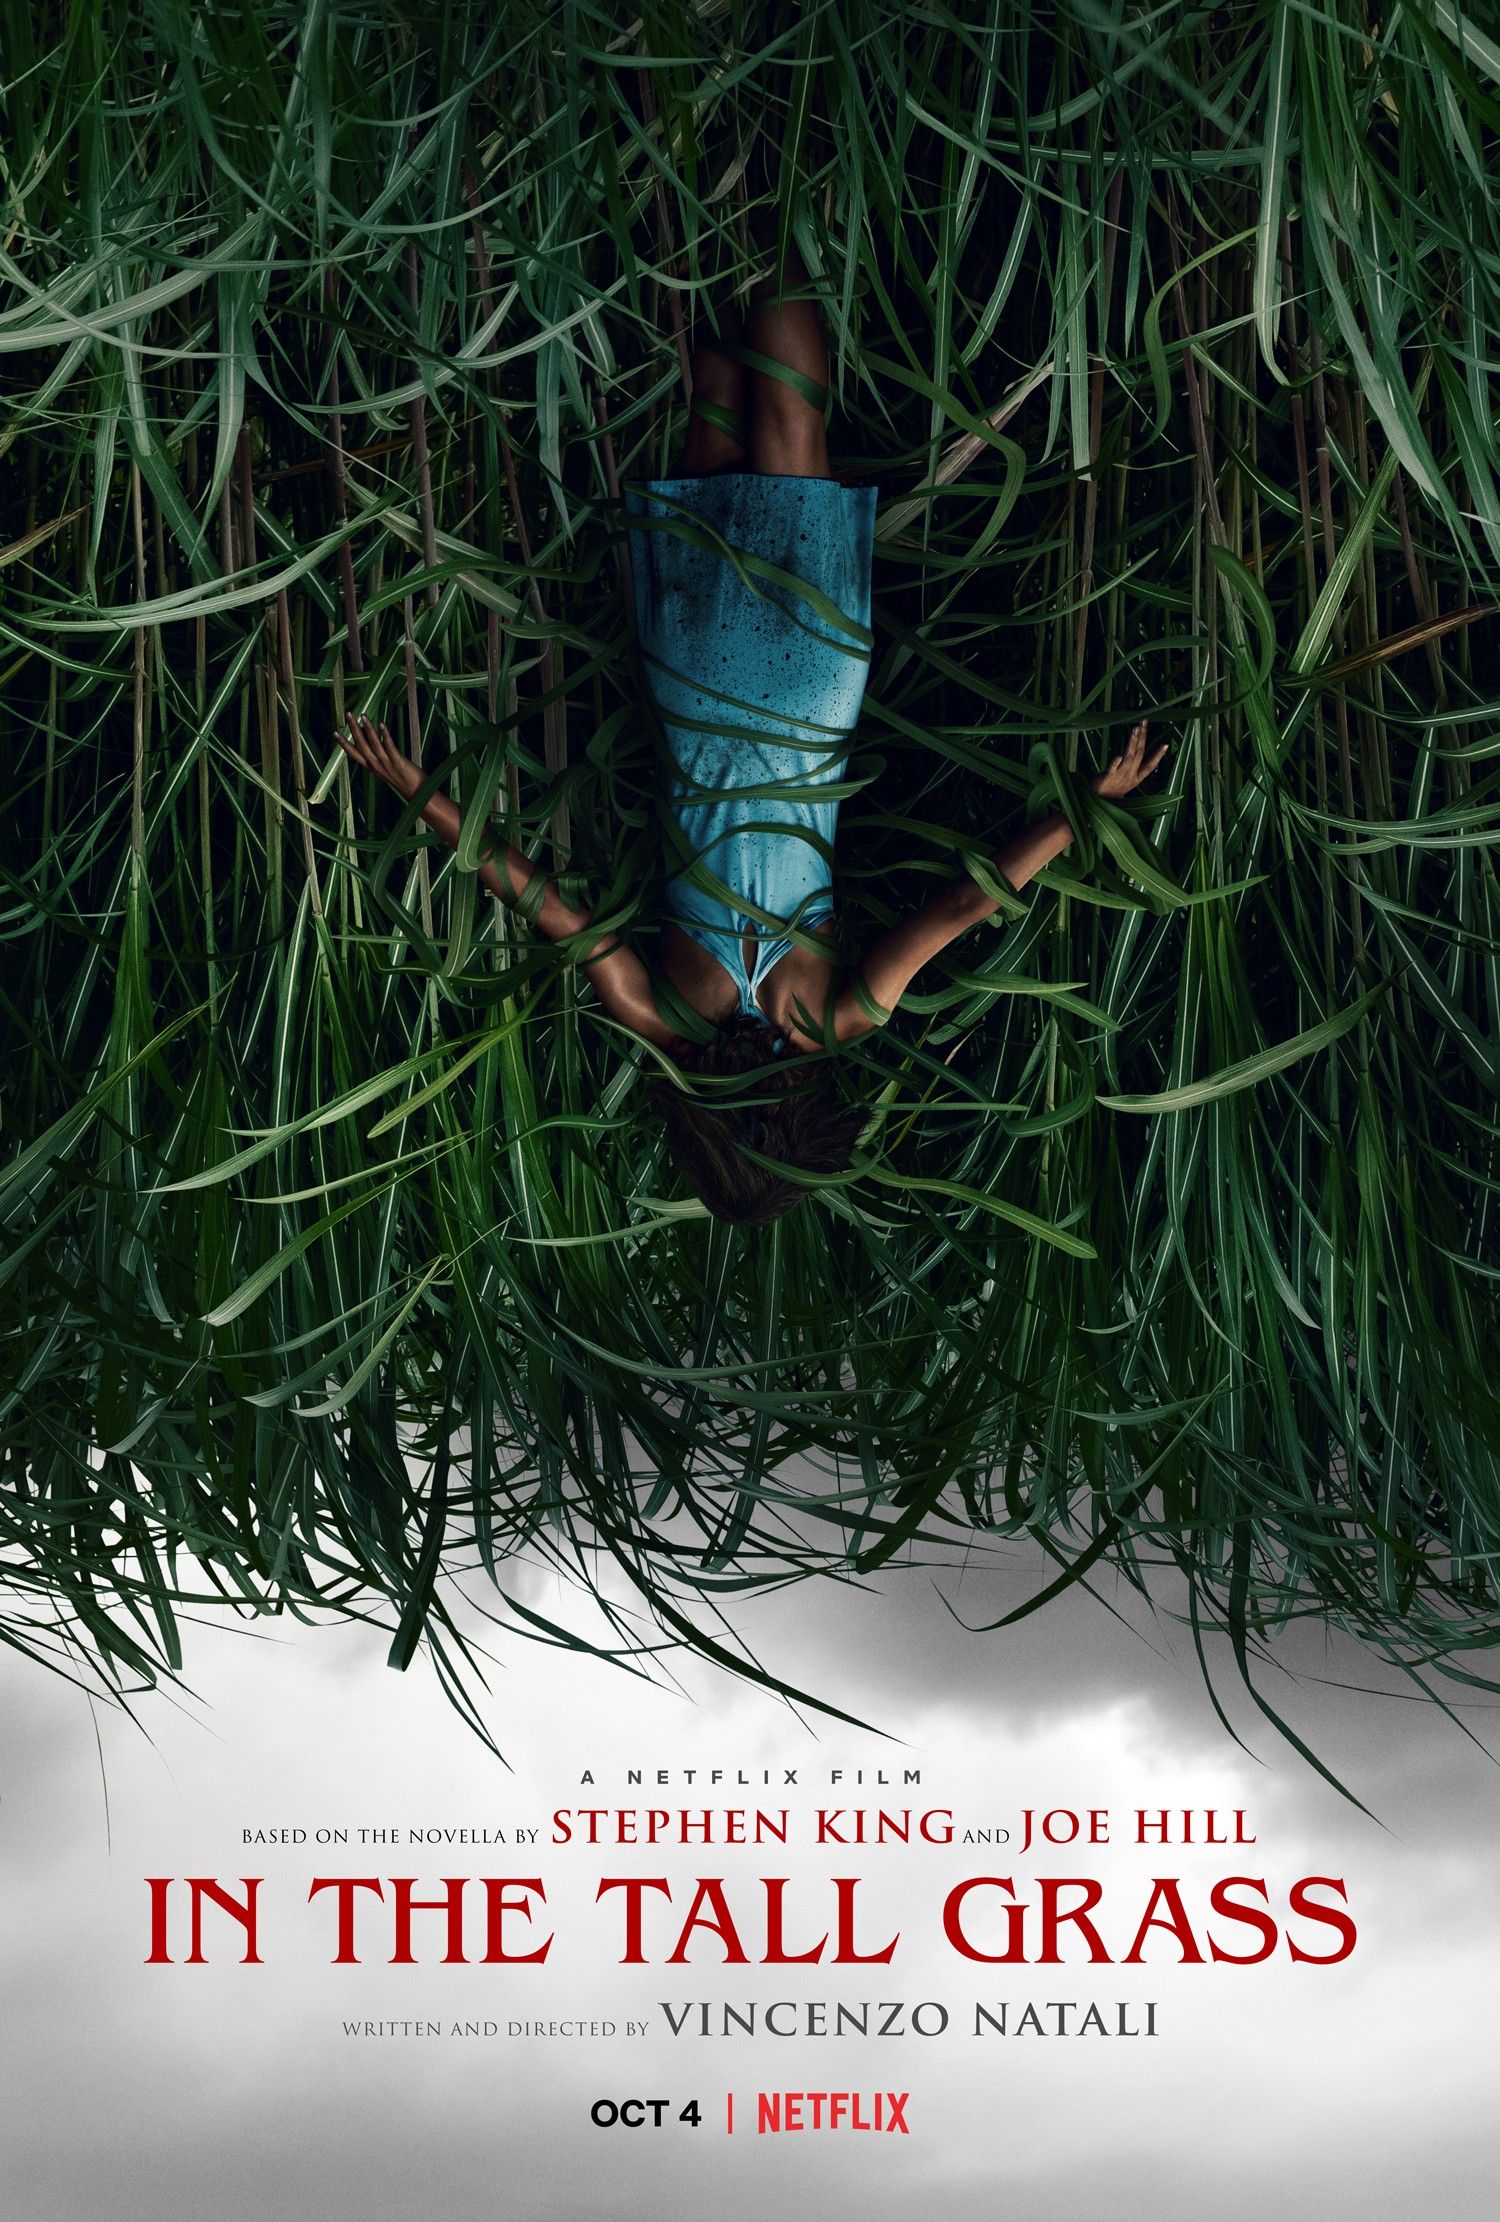 Stephen King & Joe Hill’s In The Tall Grass Gets a Poster & Release Date